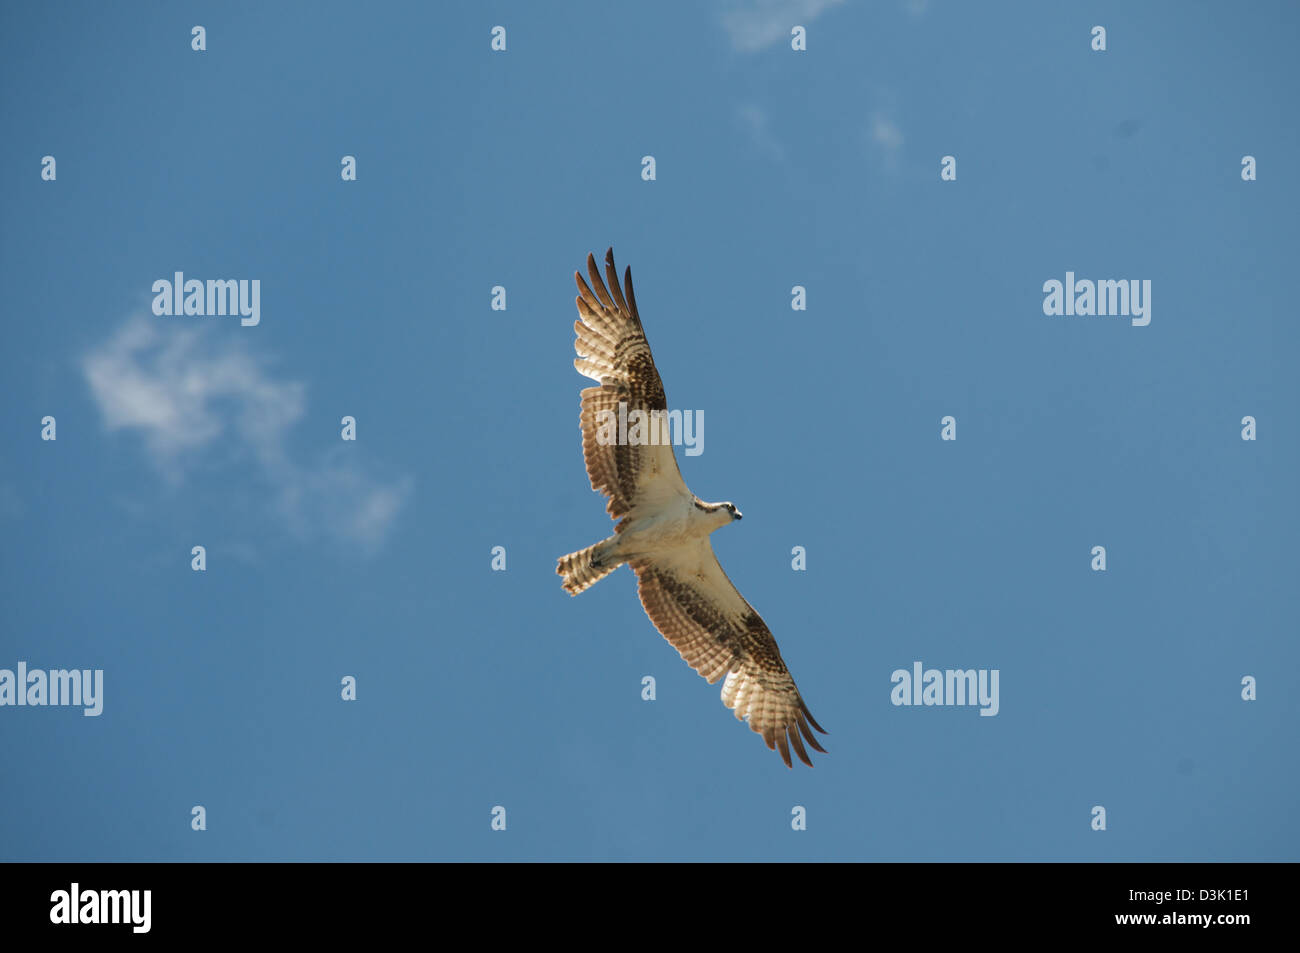 A view from below of a hawk with wings spread in flight Stock Photo